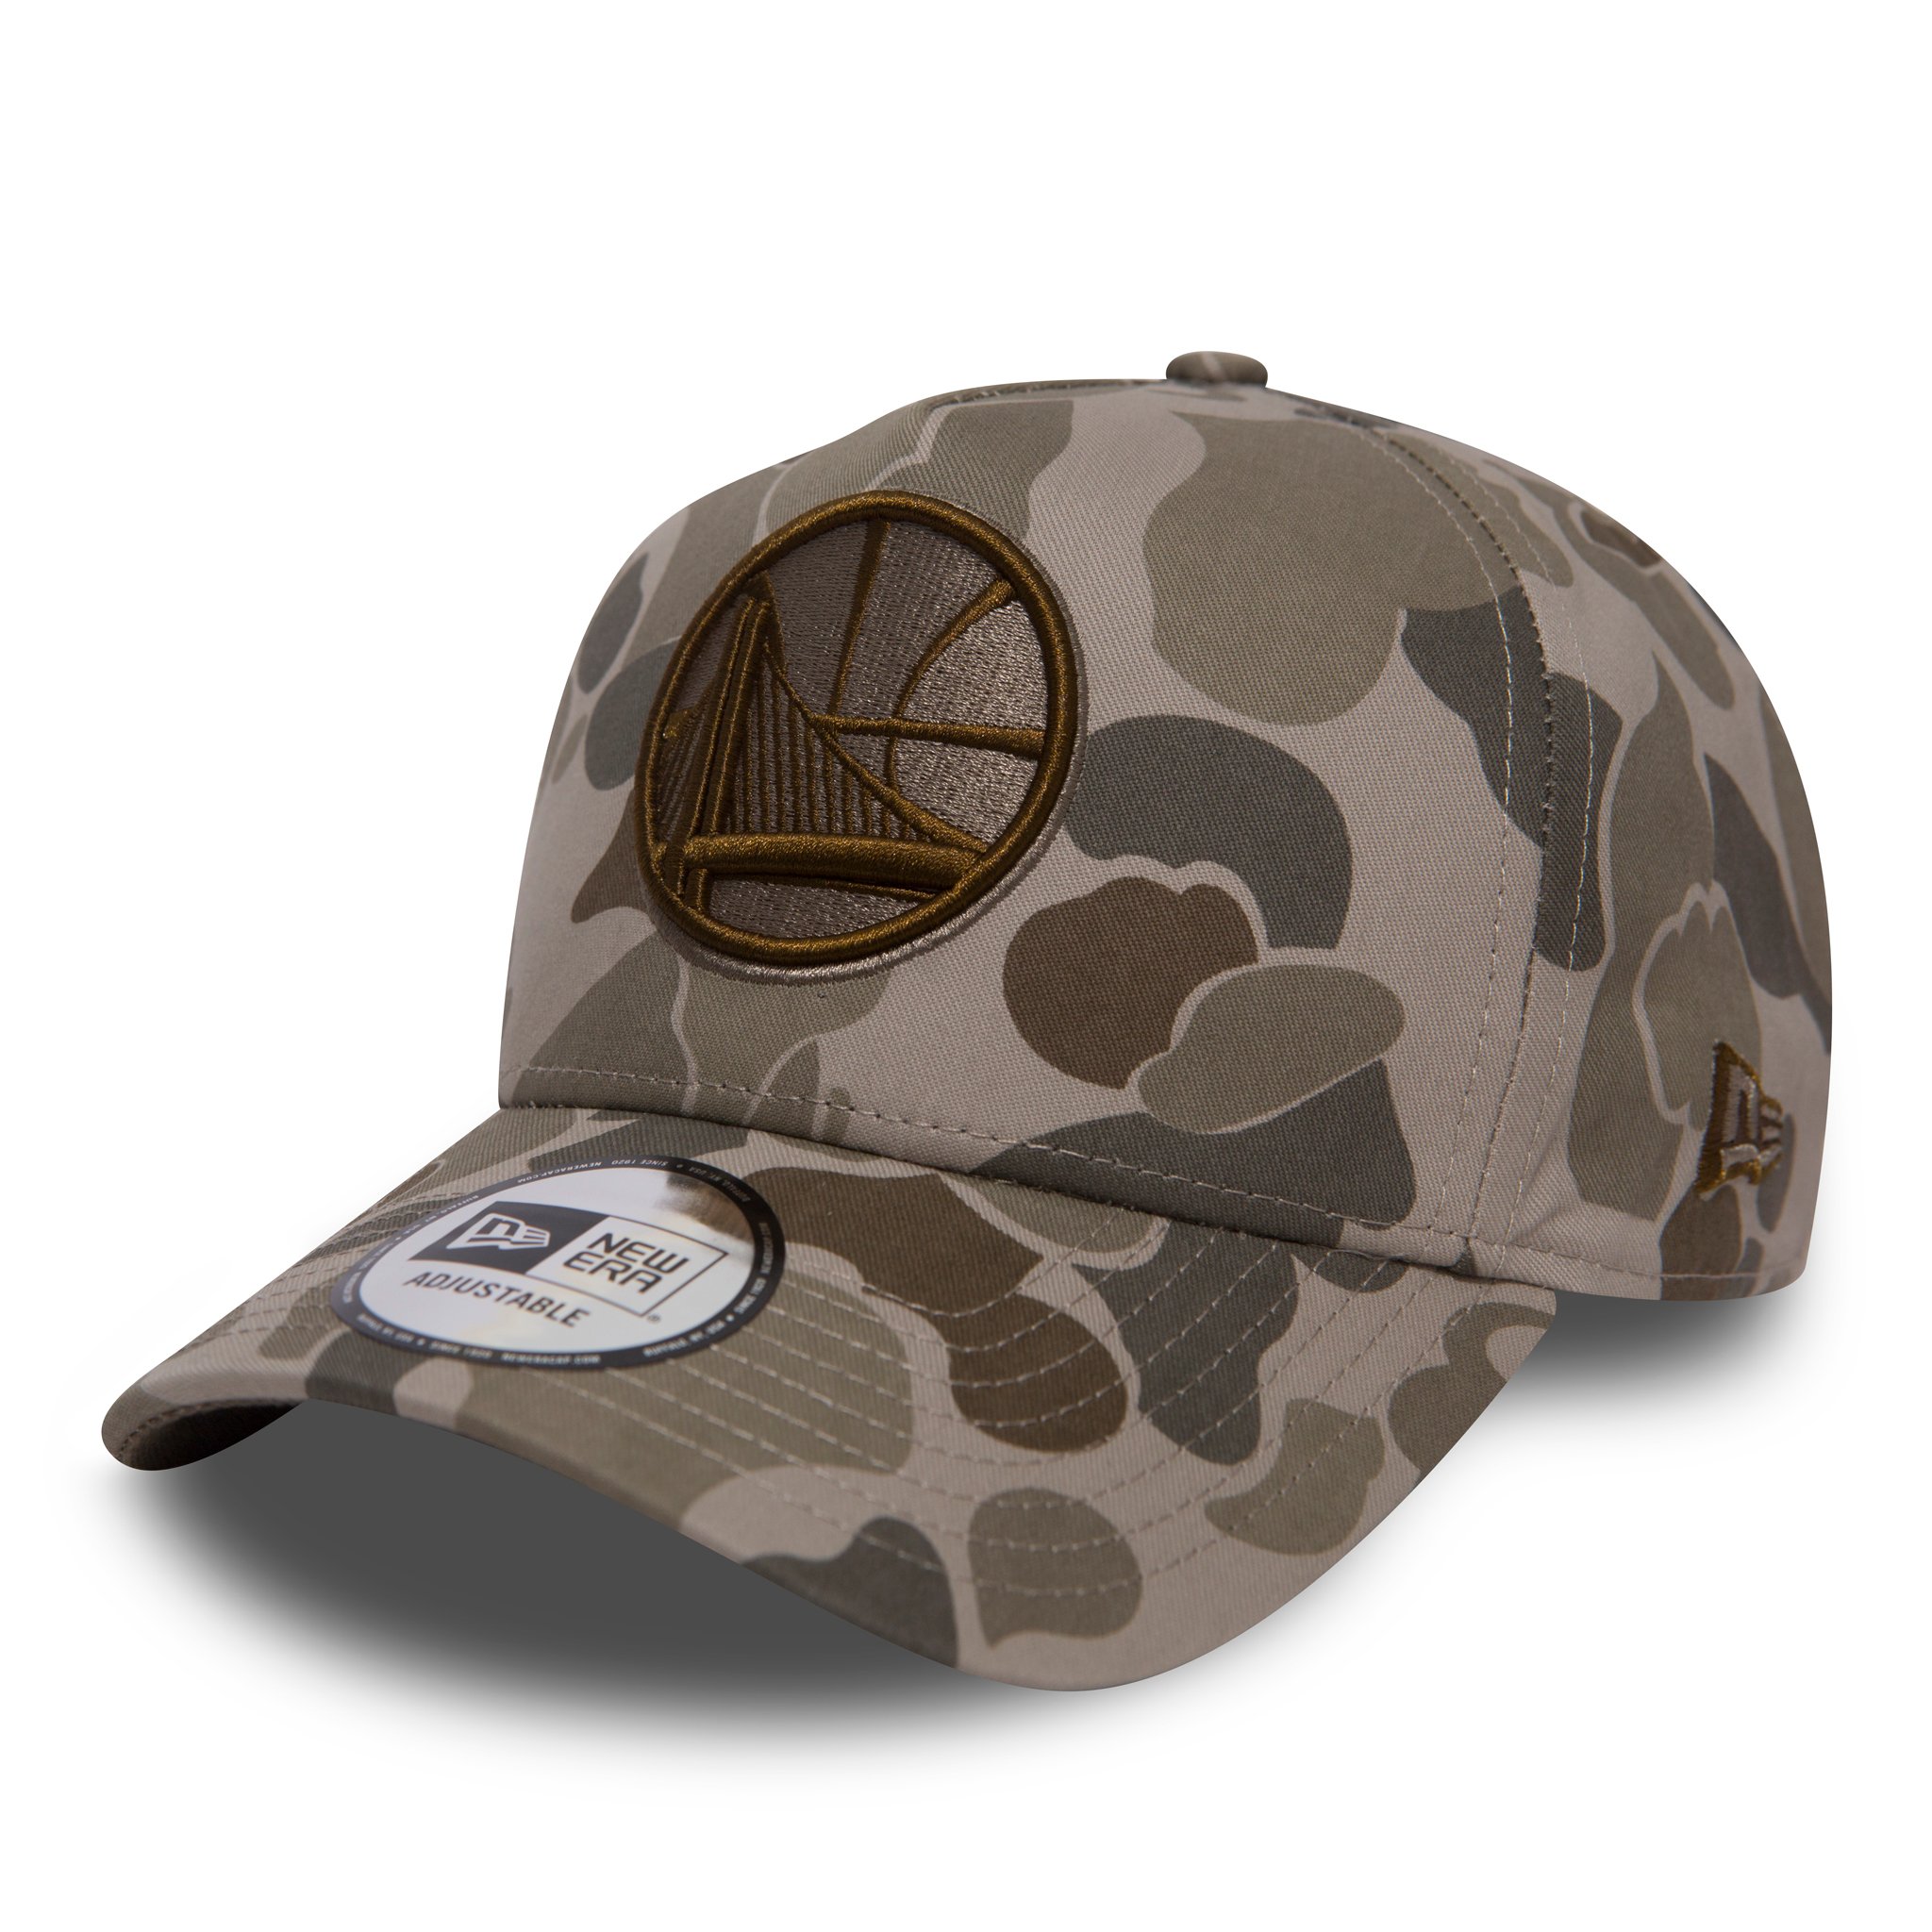 Gorra Golden State Warriors 9FORTY A-Frame, camuflaje